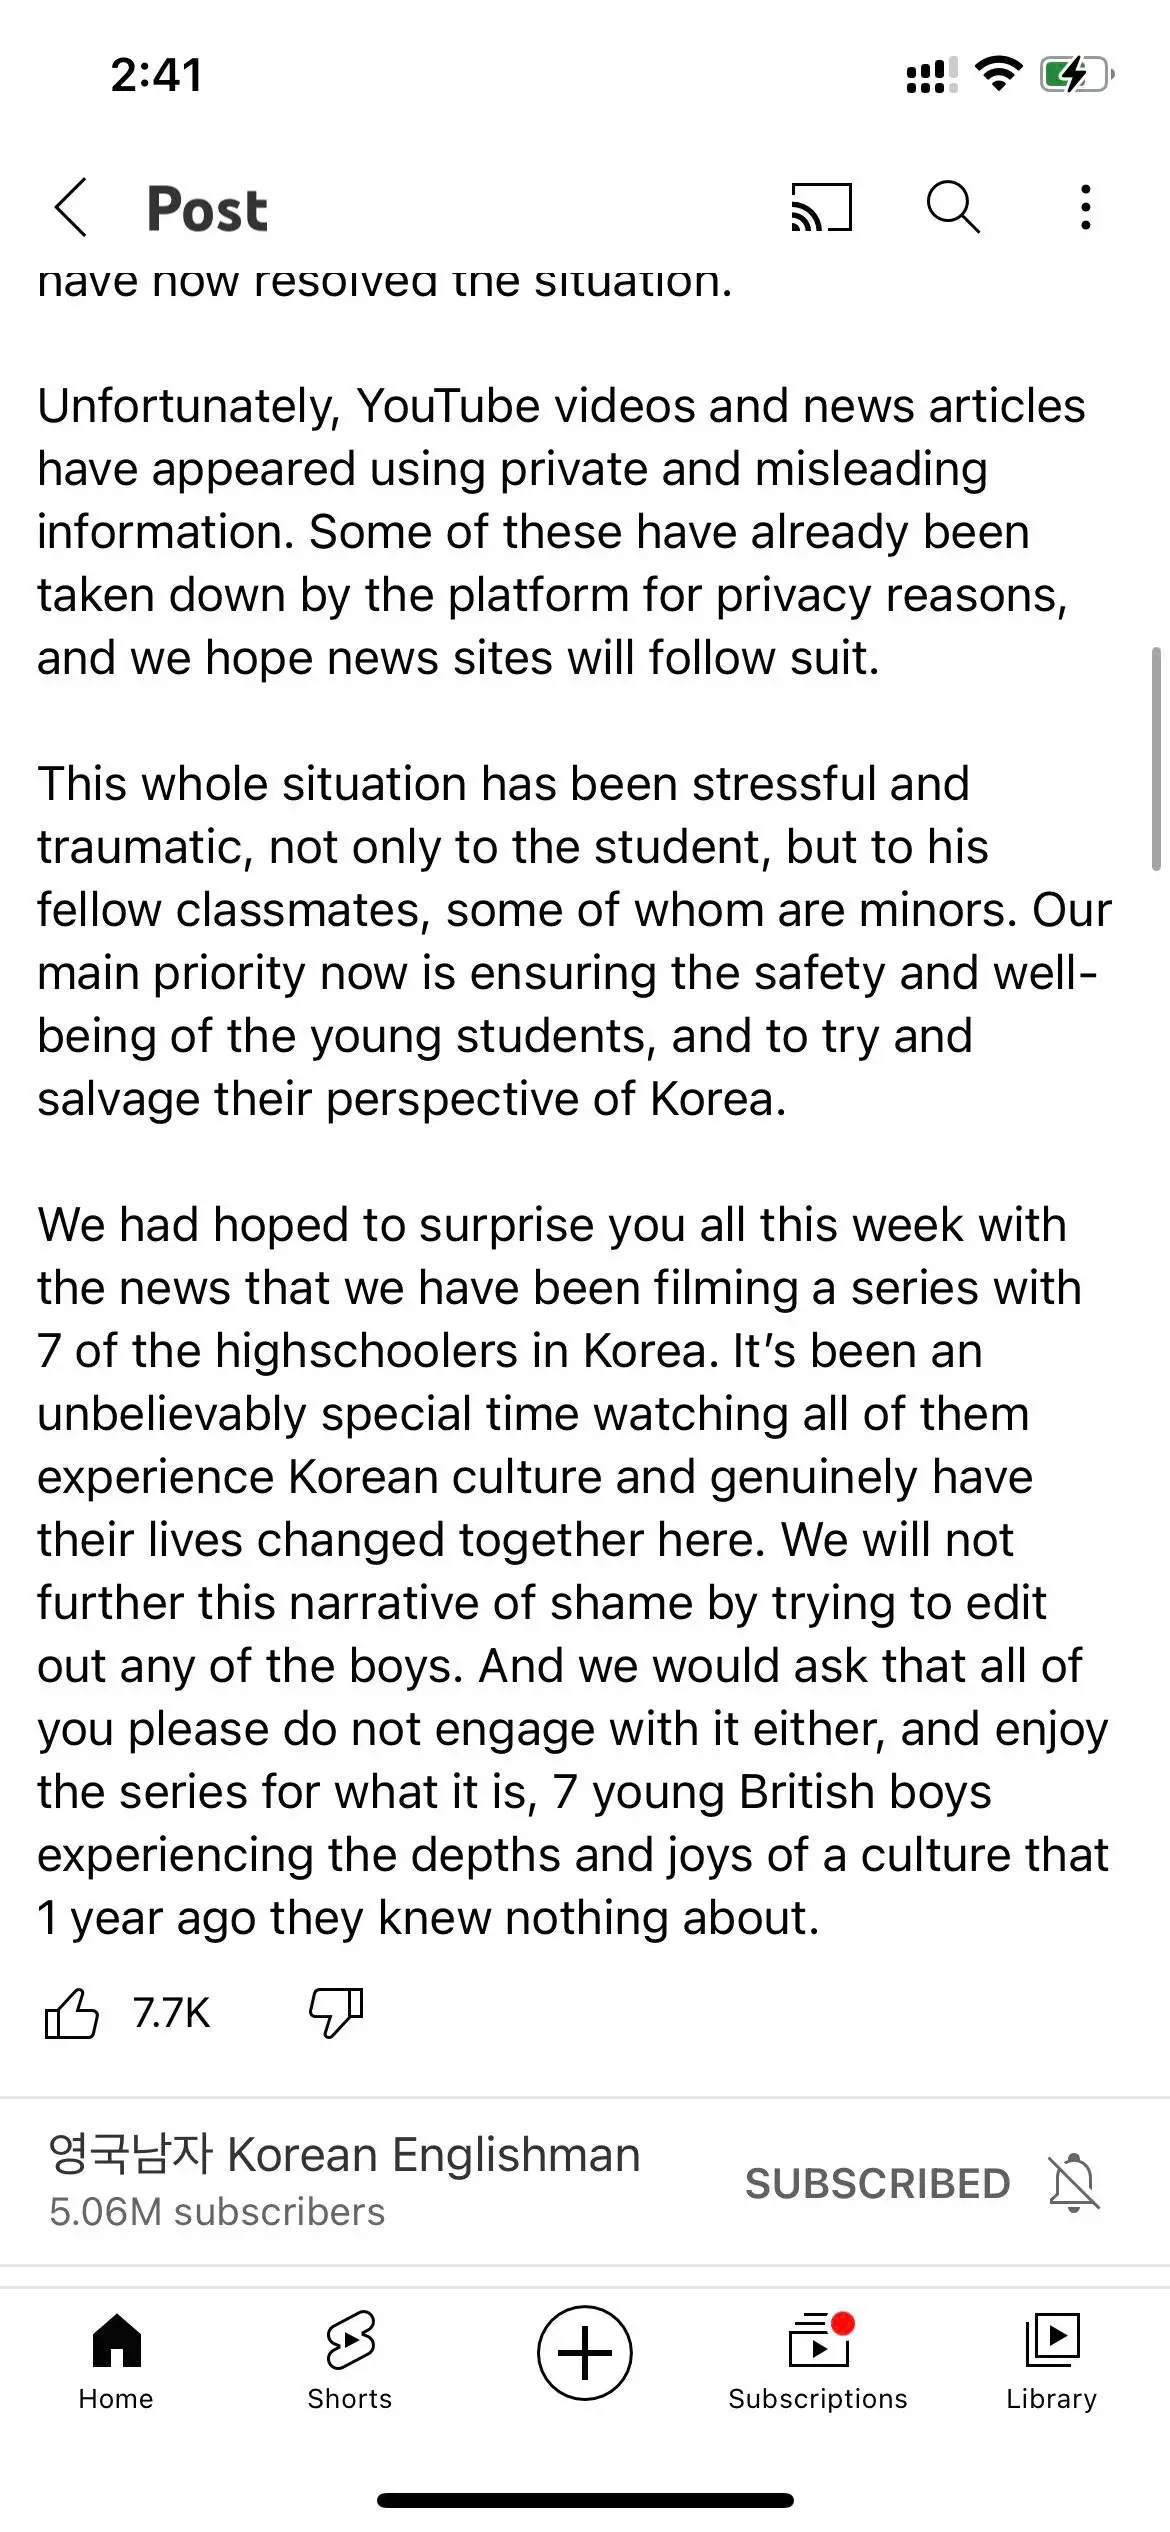 Korean Englishman youtube channel made a statement regarding the grooming issue